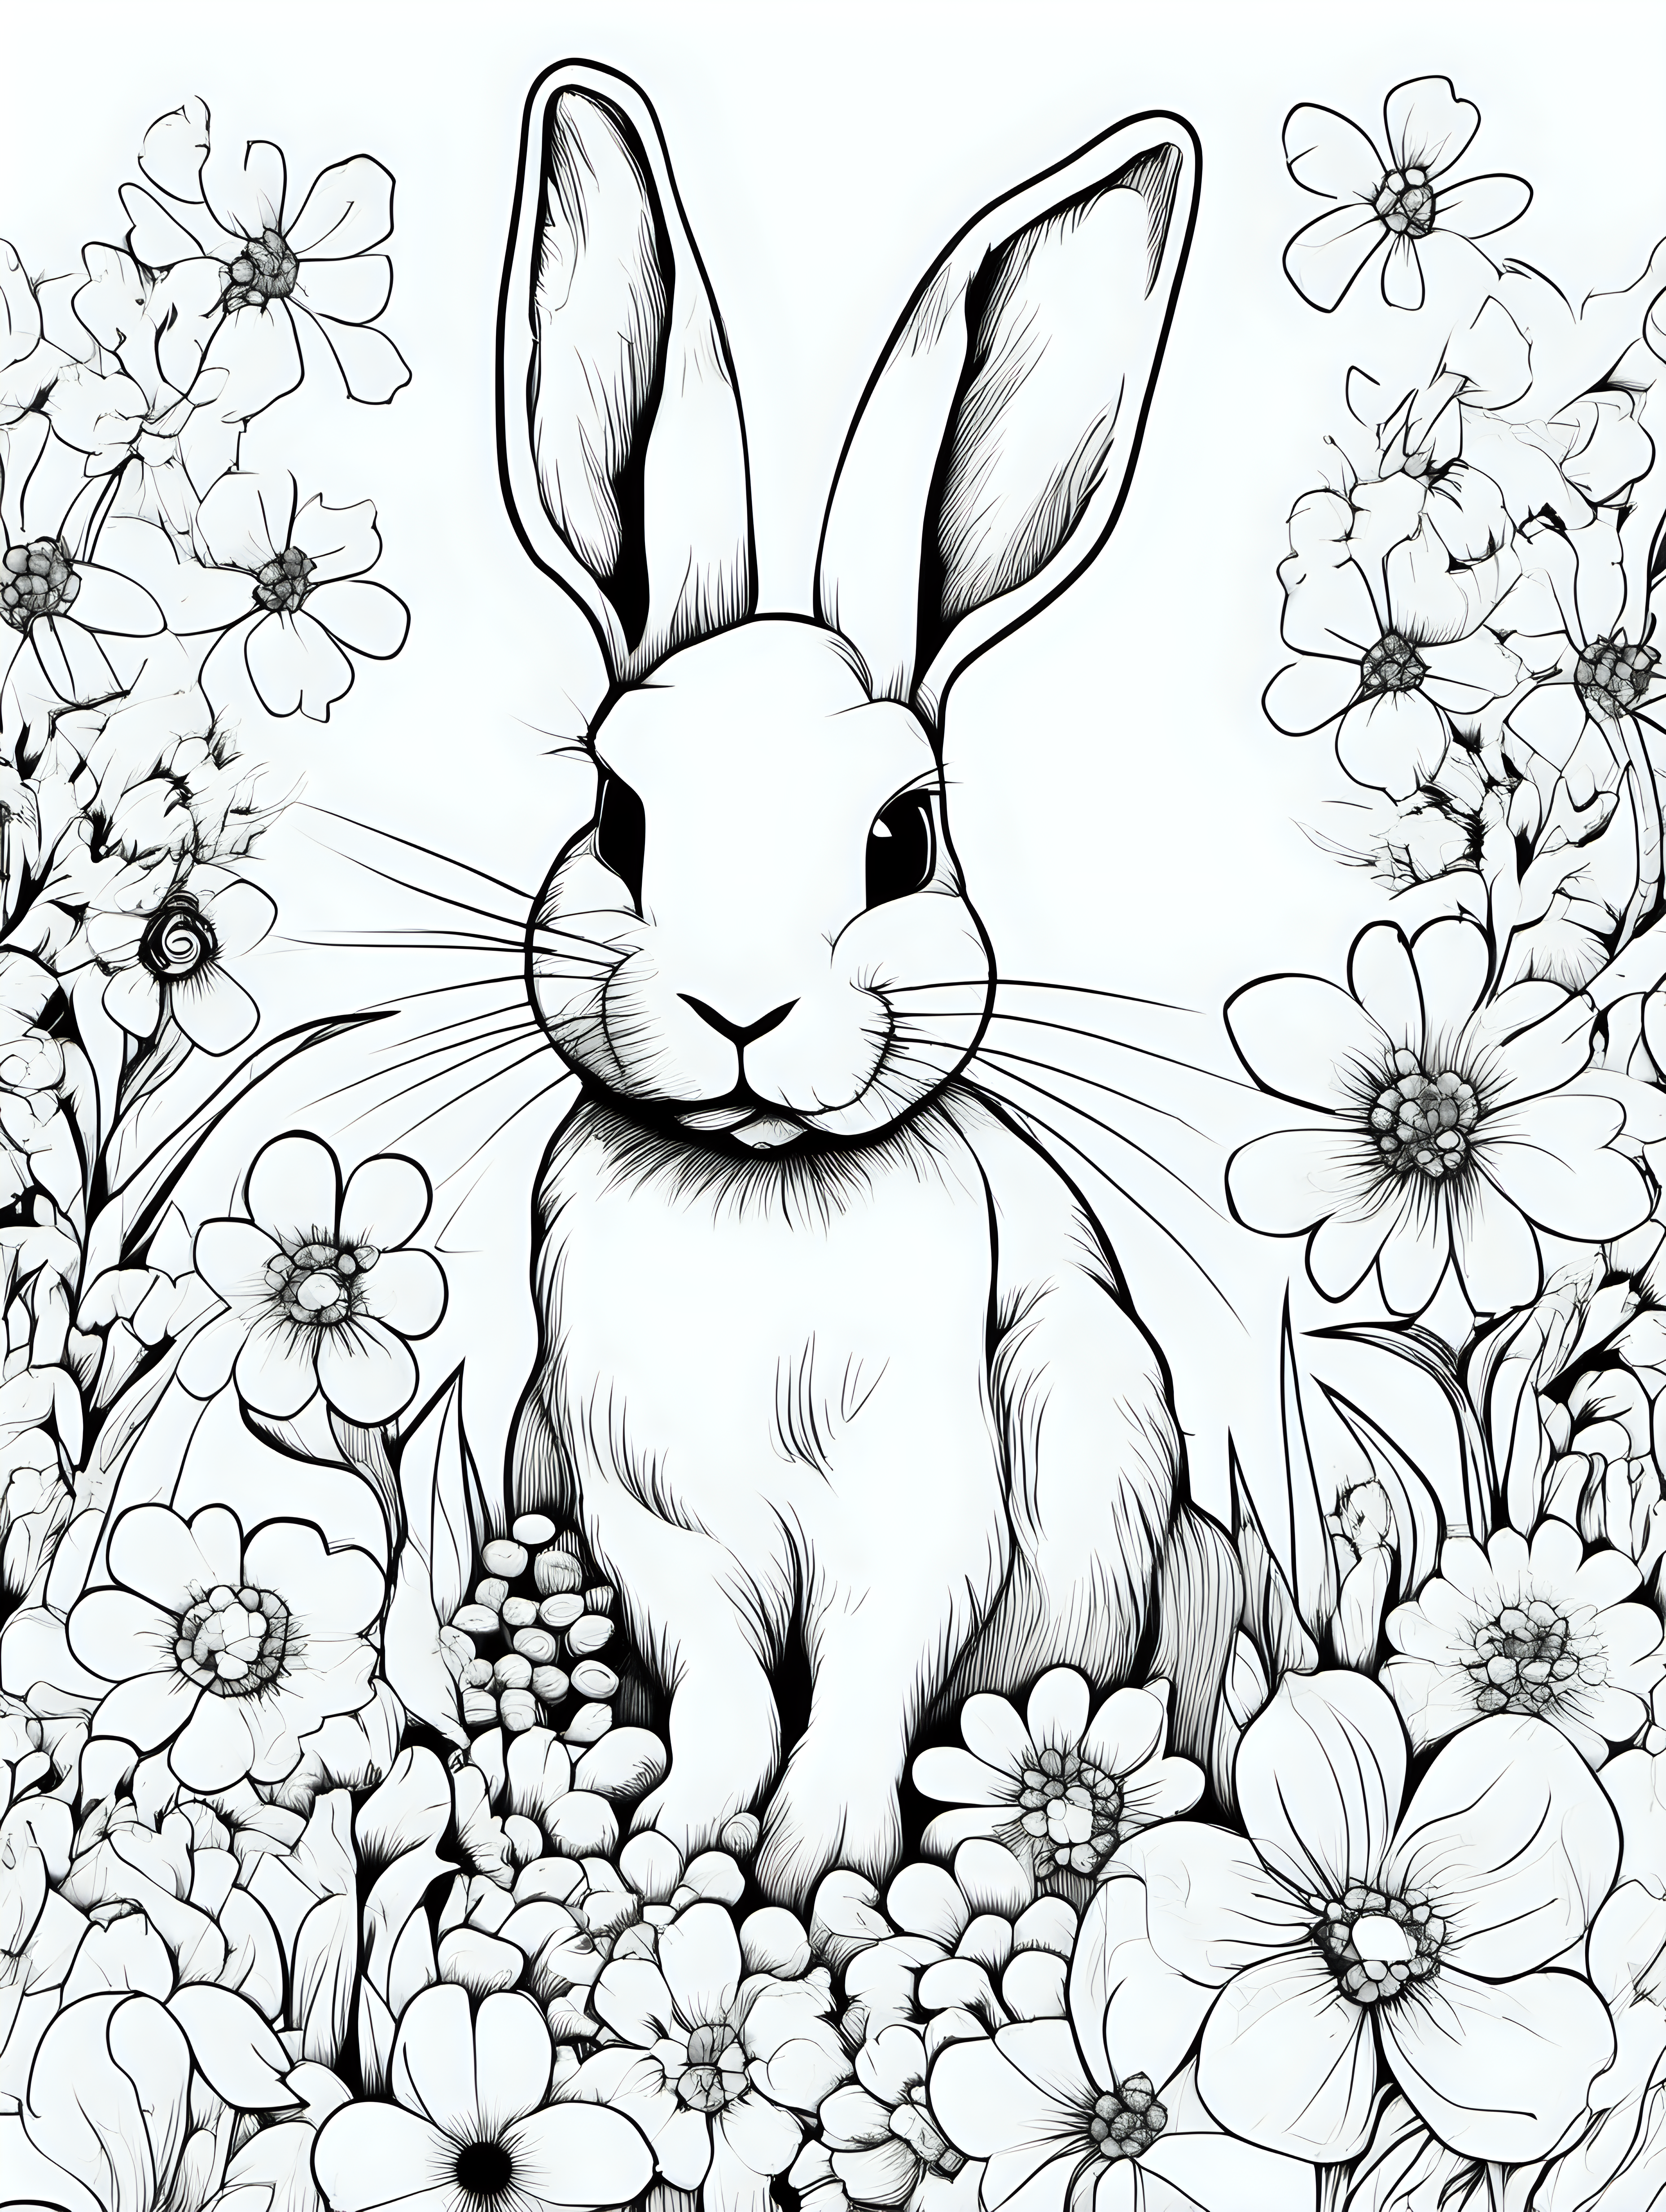 rabbit covered in flowers , simple draw, no colors, flower background